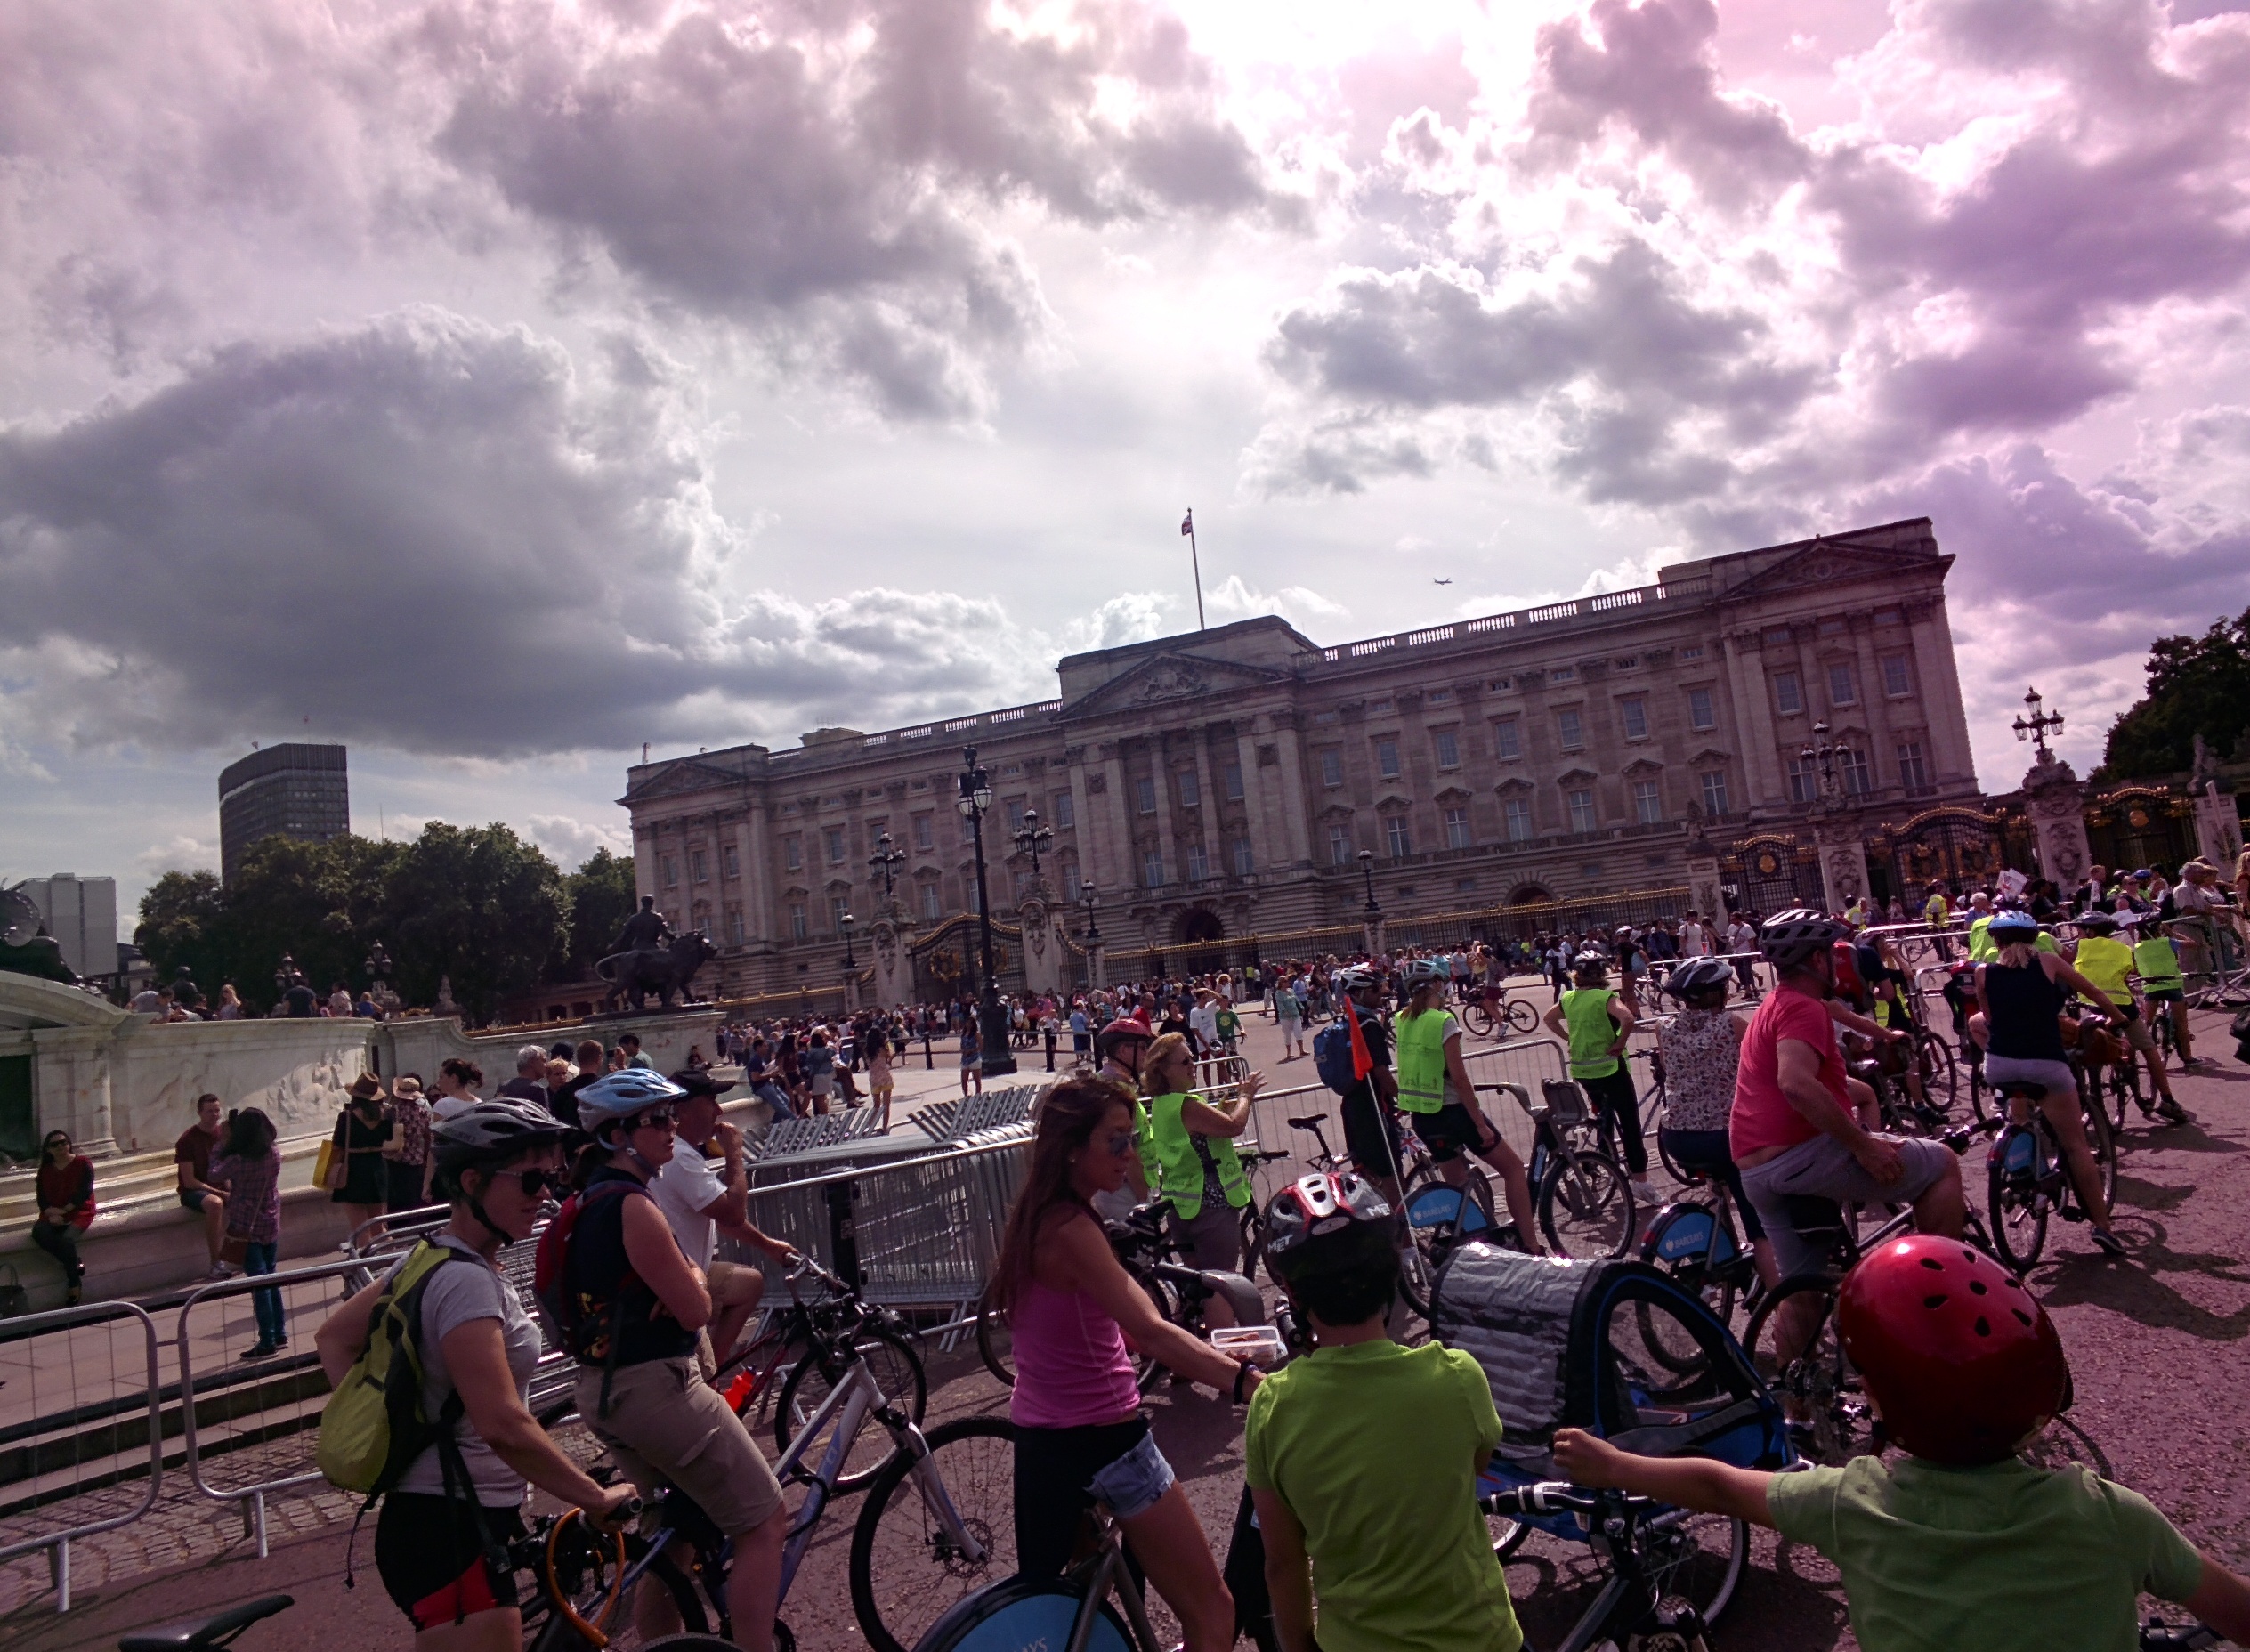 Riding around London with Google Glass and Prudential RideLondon